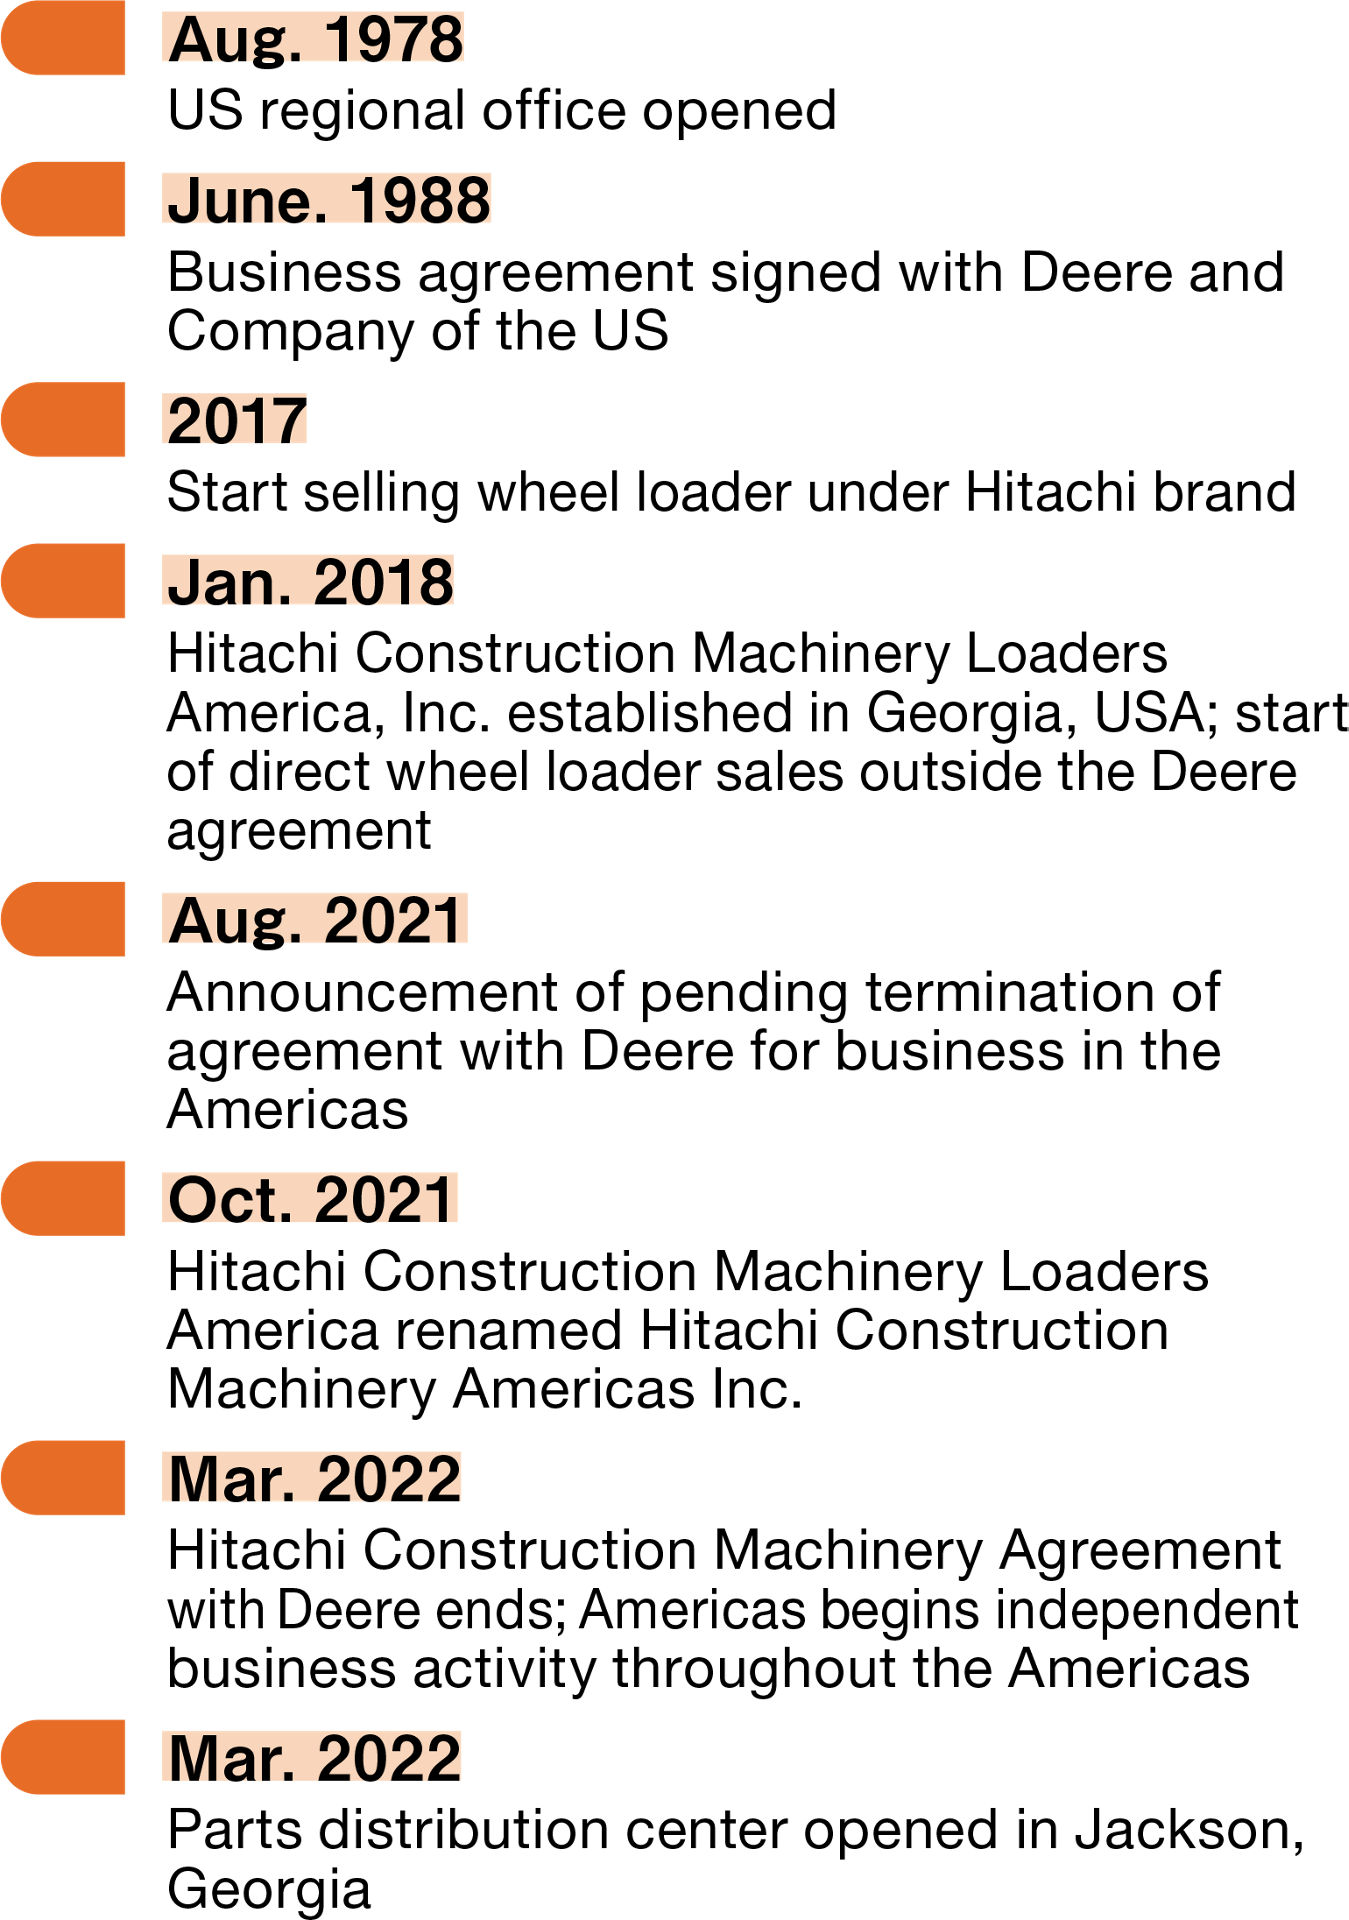 Highlights of Hitachi Construction Machinery activity in the Americas